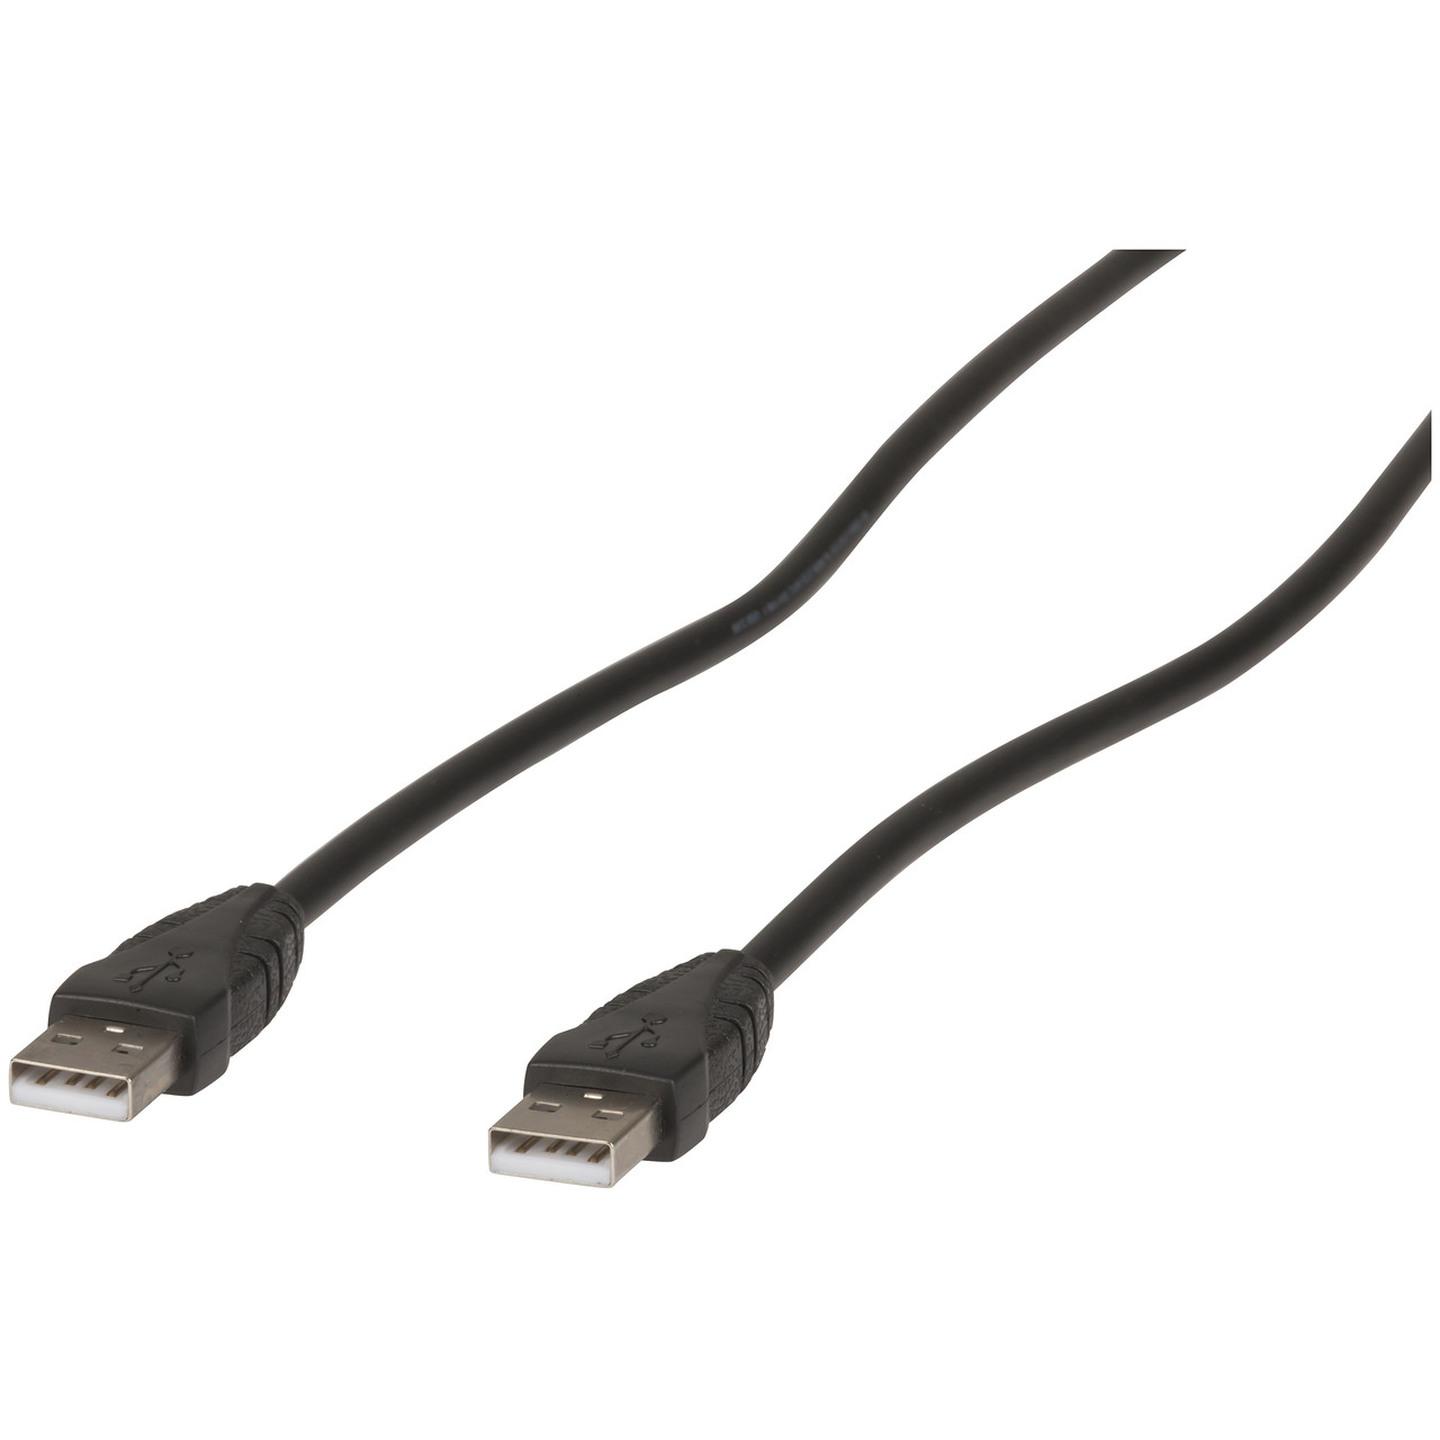 1.8m USB 2.0 A Male to A Male Cable 5 Pack